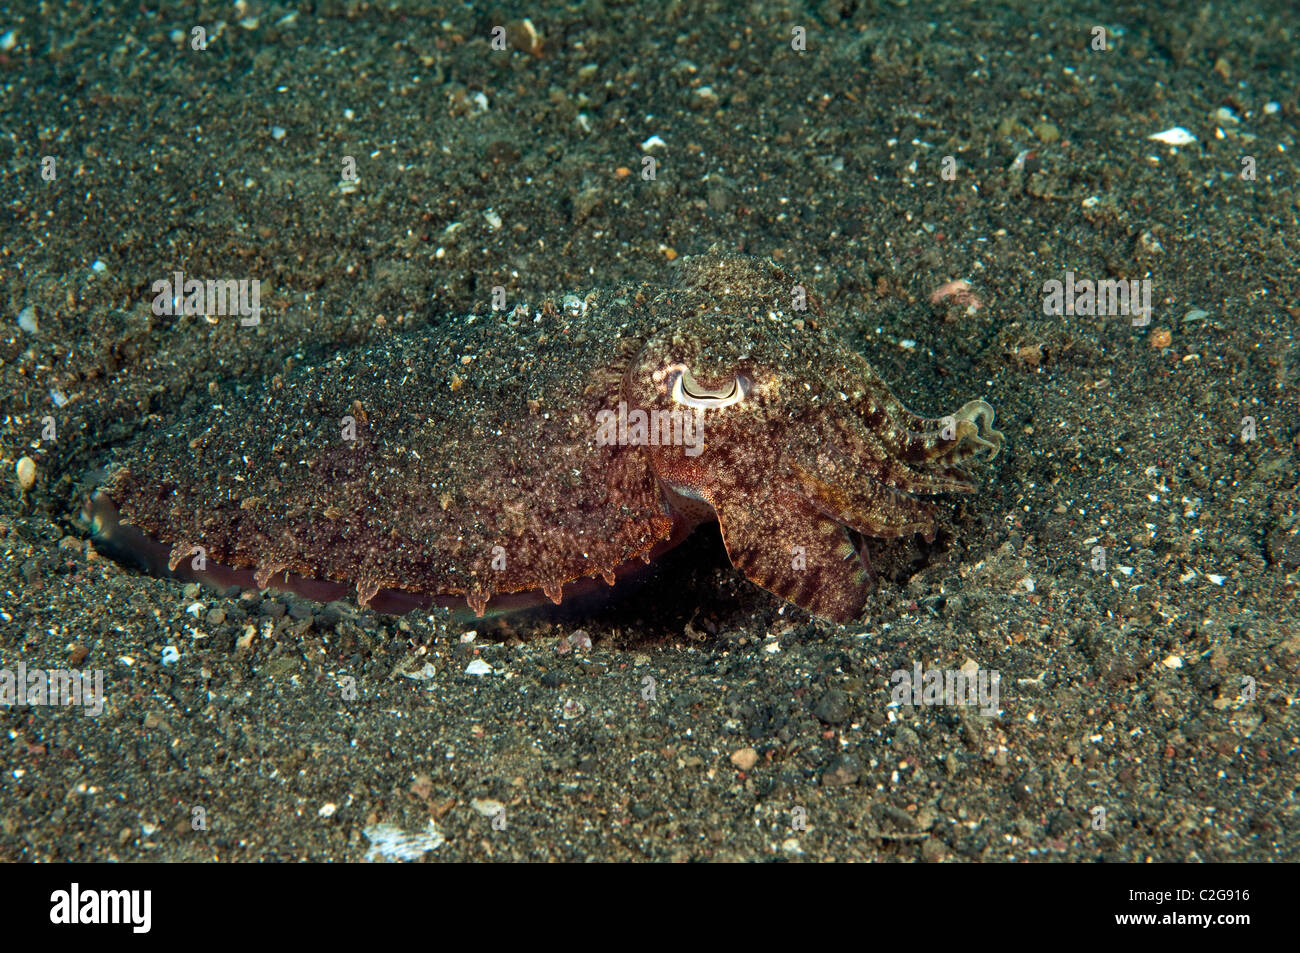 Nadel, Tintenfisch, Sepia Aculeata, Sulawesi in Indonesien. Stockfoto